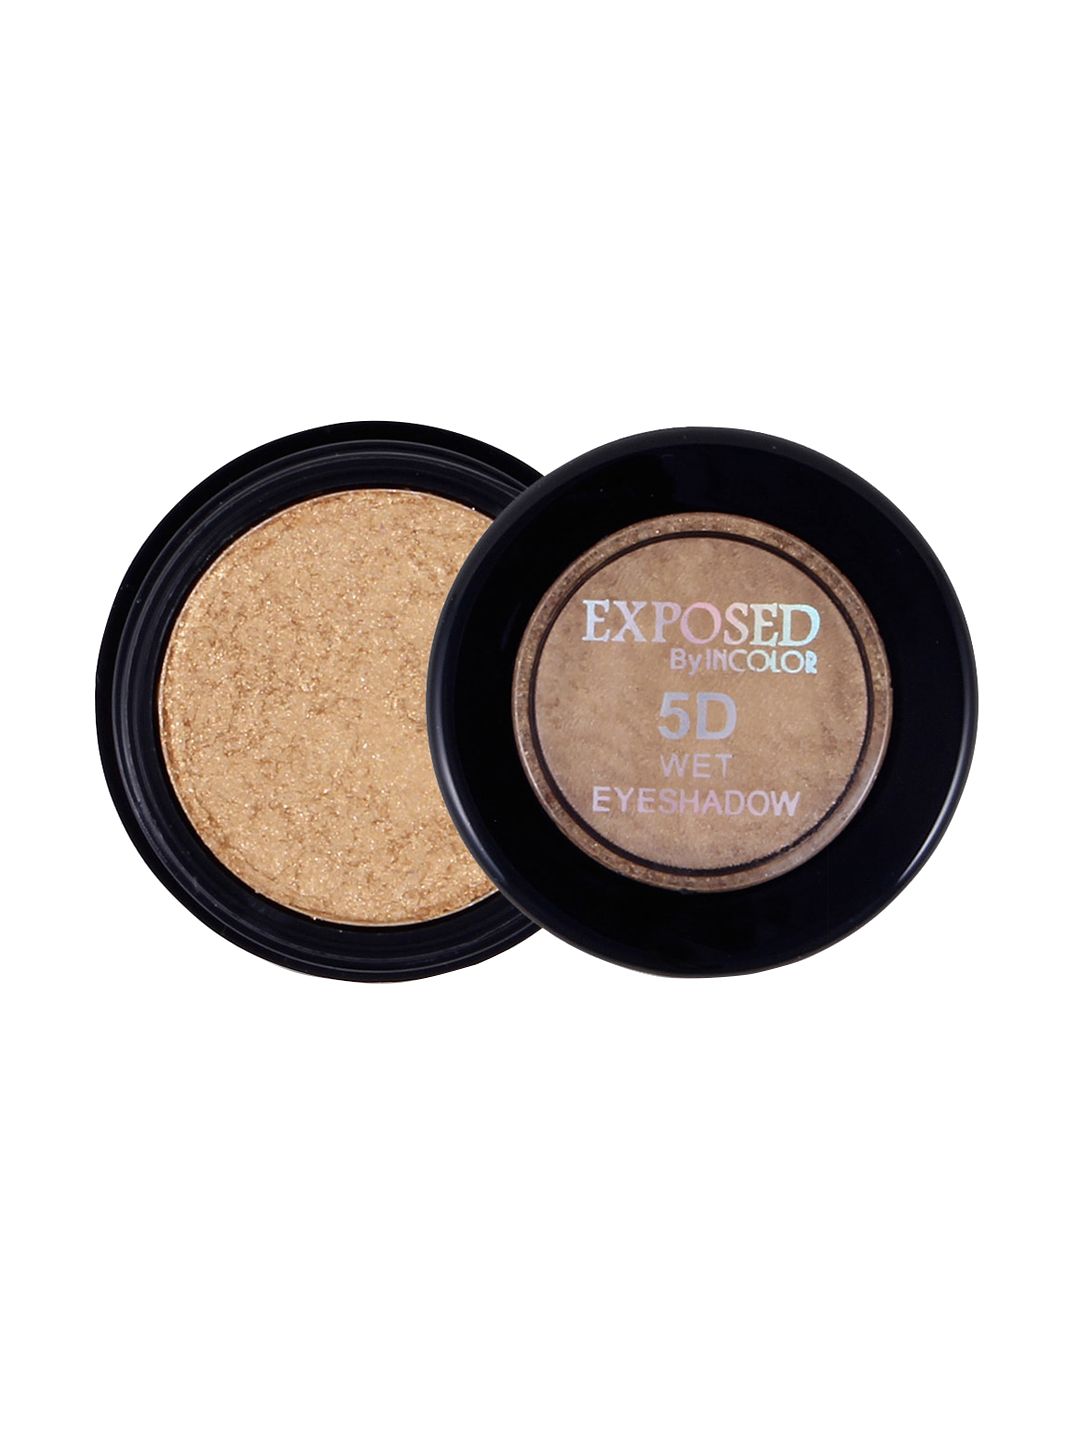 INCOLOR Women 5 D Wet Eyeshadow 01 4.5 gm Price in India